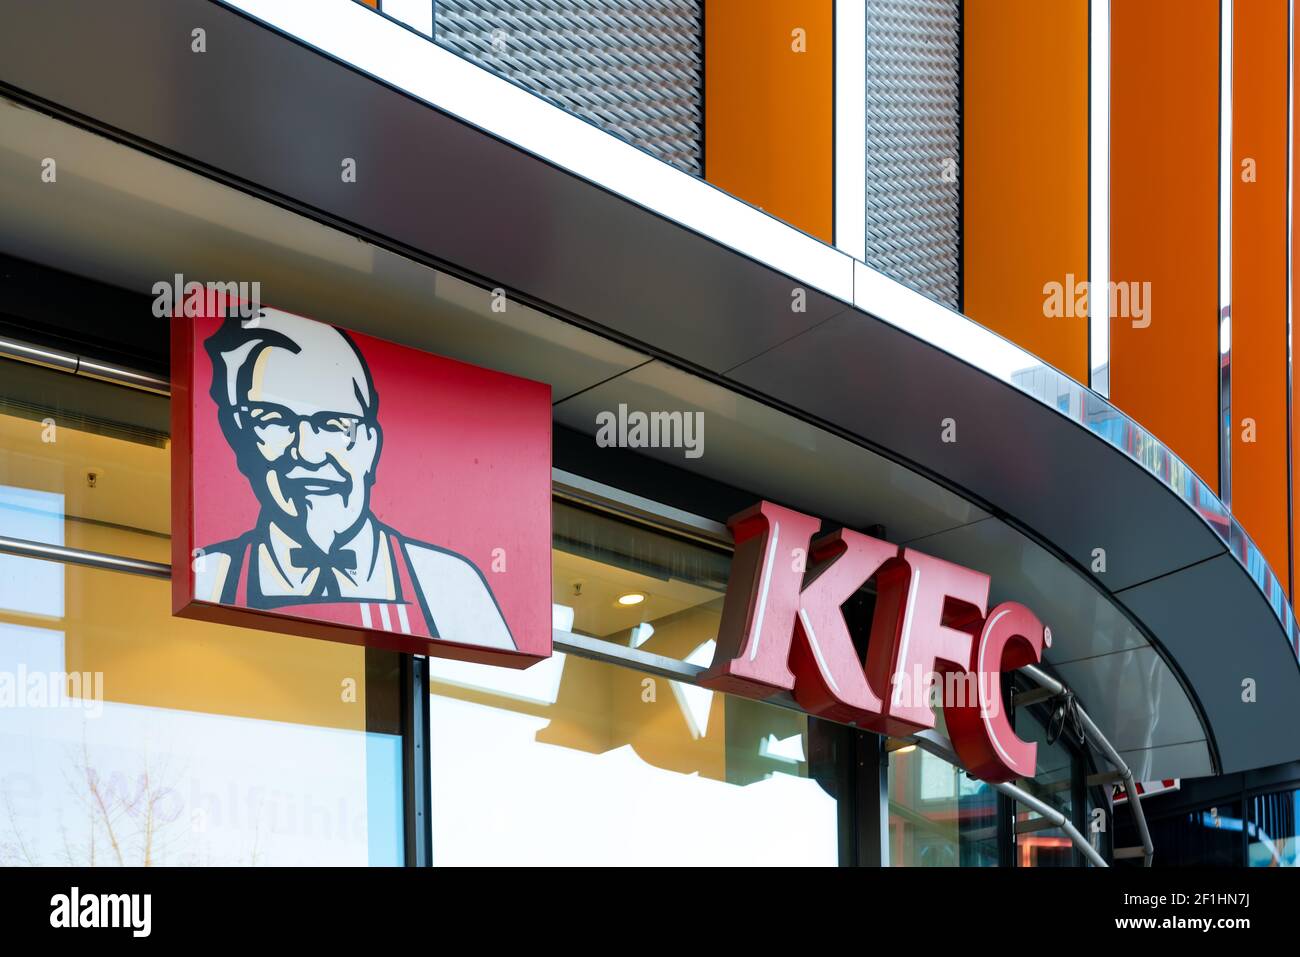 KFC fast food restaurant. Kentucky Fried Chicken (KFC) is the world's second largest restaurant chain with almost 20,000 locations globally. Stock Photo